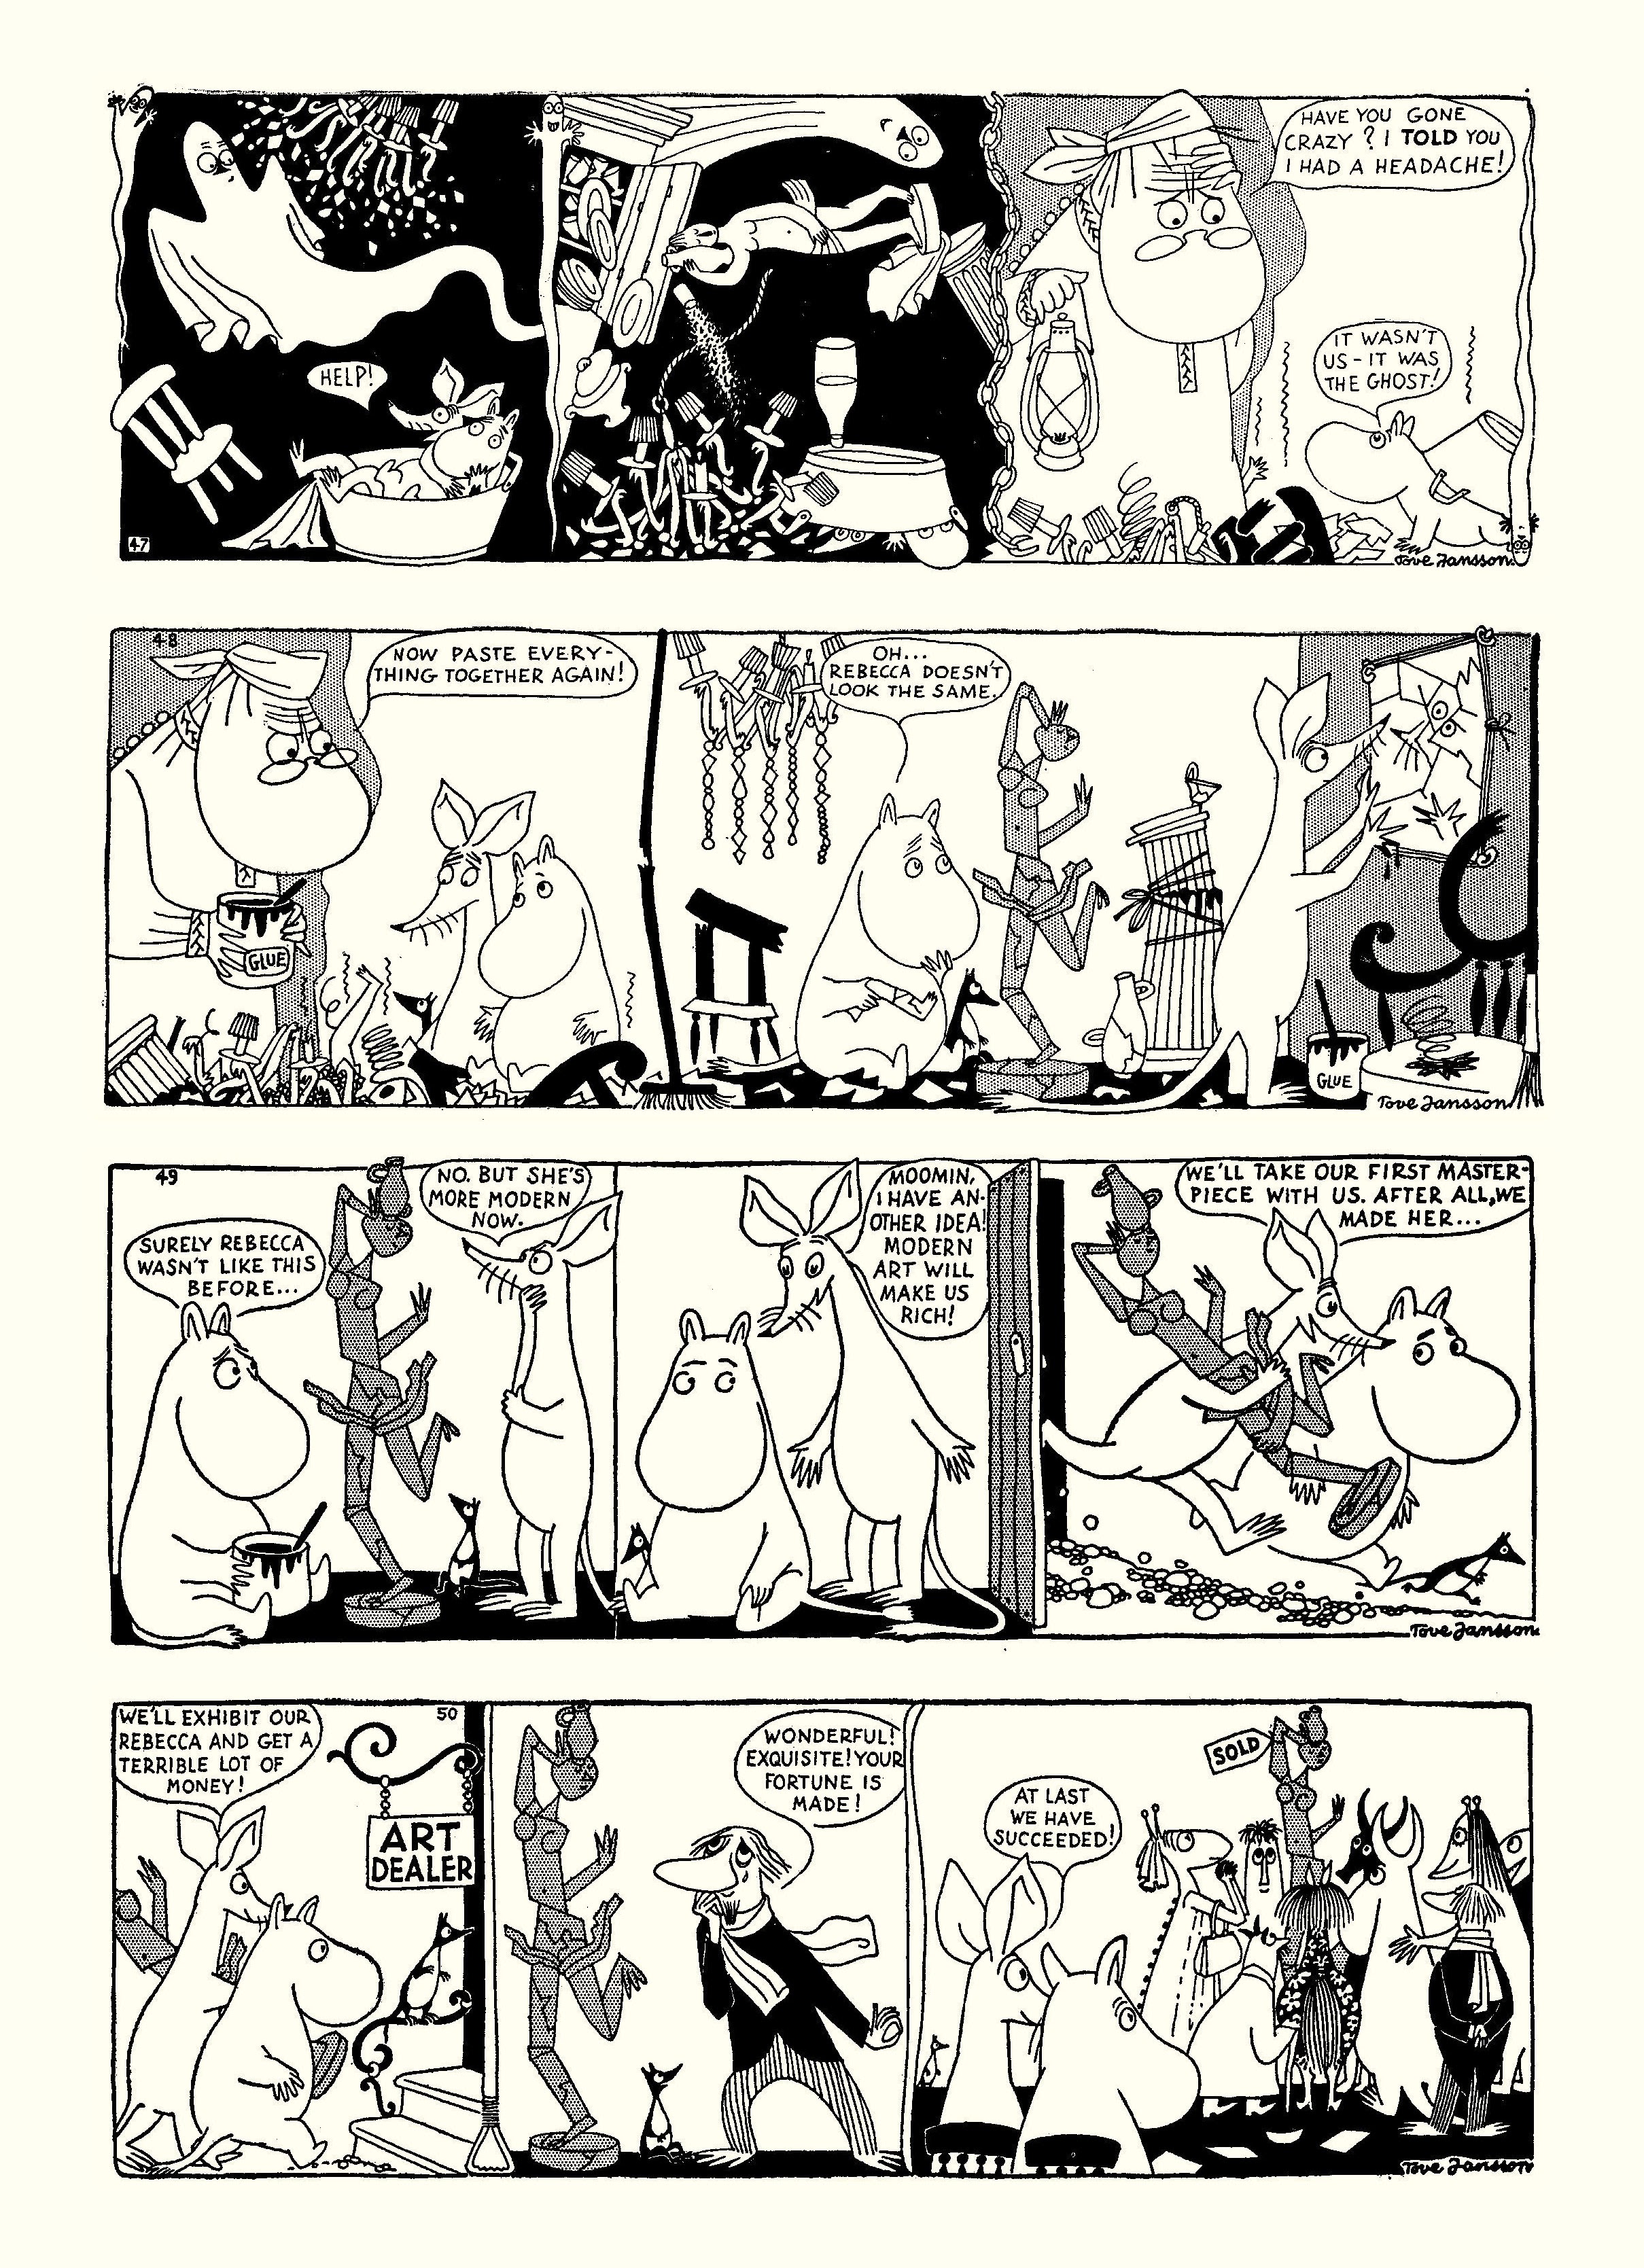 Read online Moomin: The Complete Tove Jansson Comic Strip comic -  Issue # TPB 1 - 18